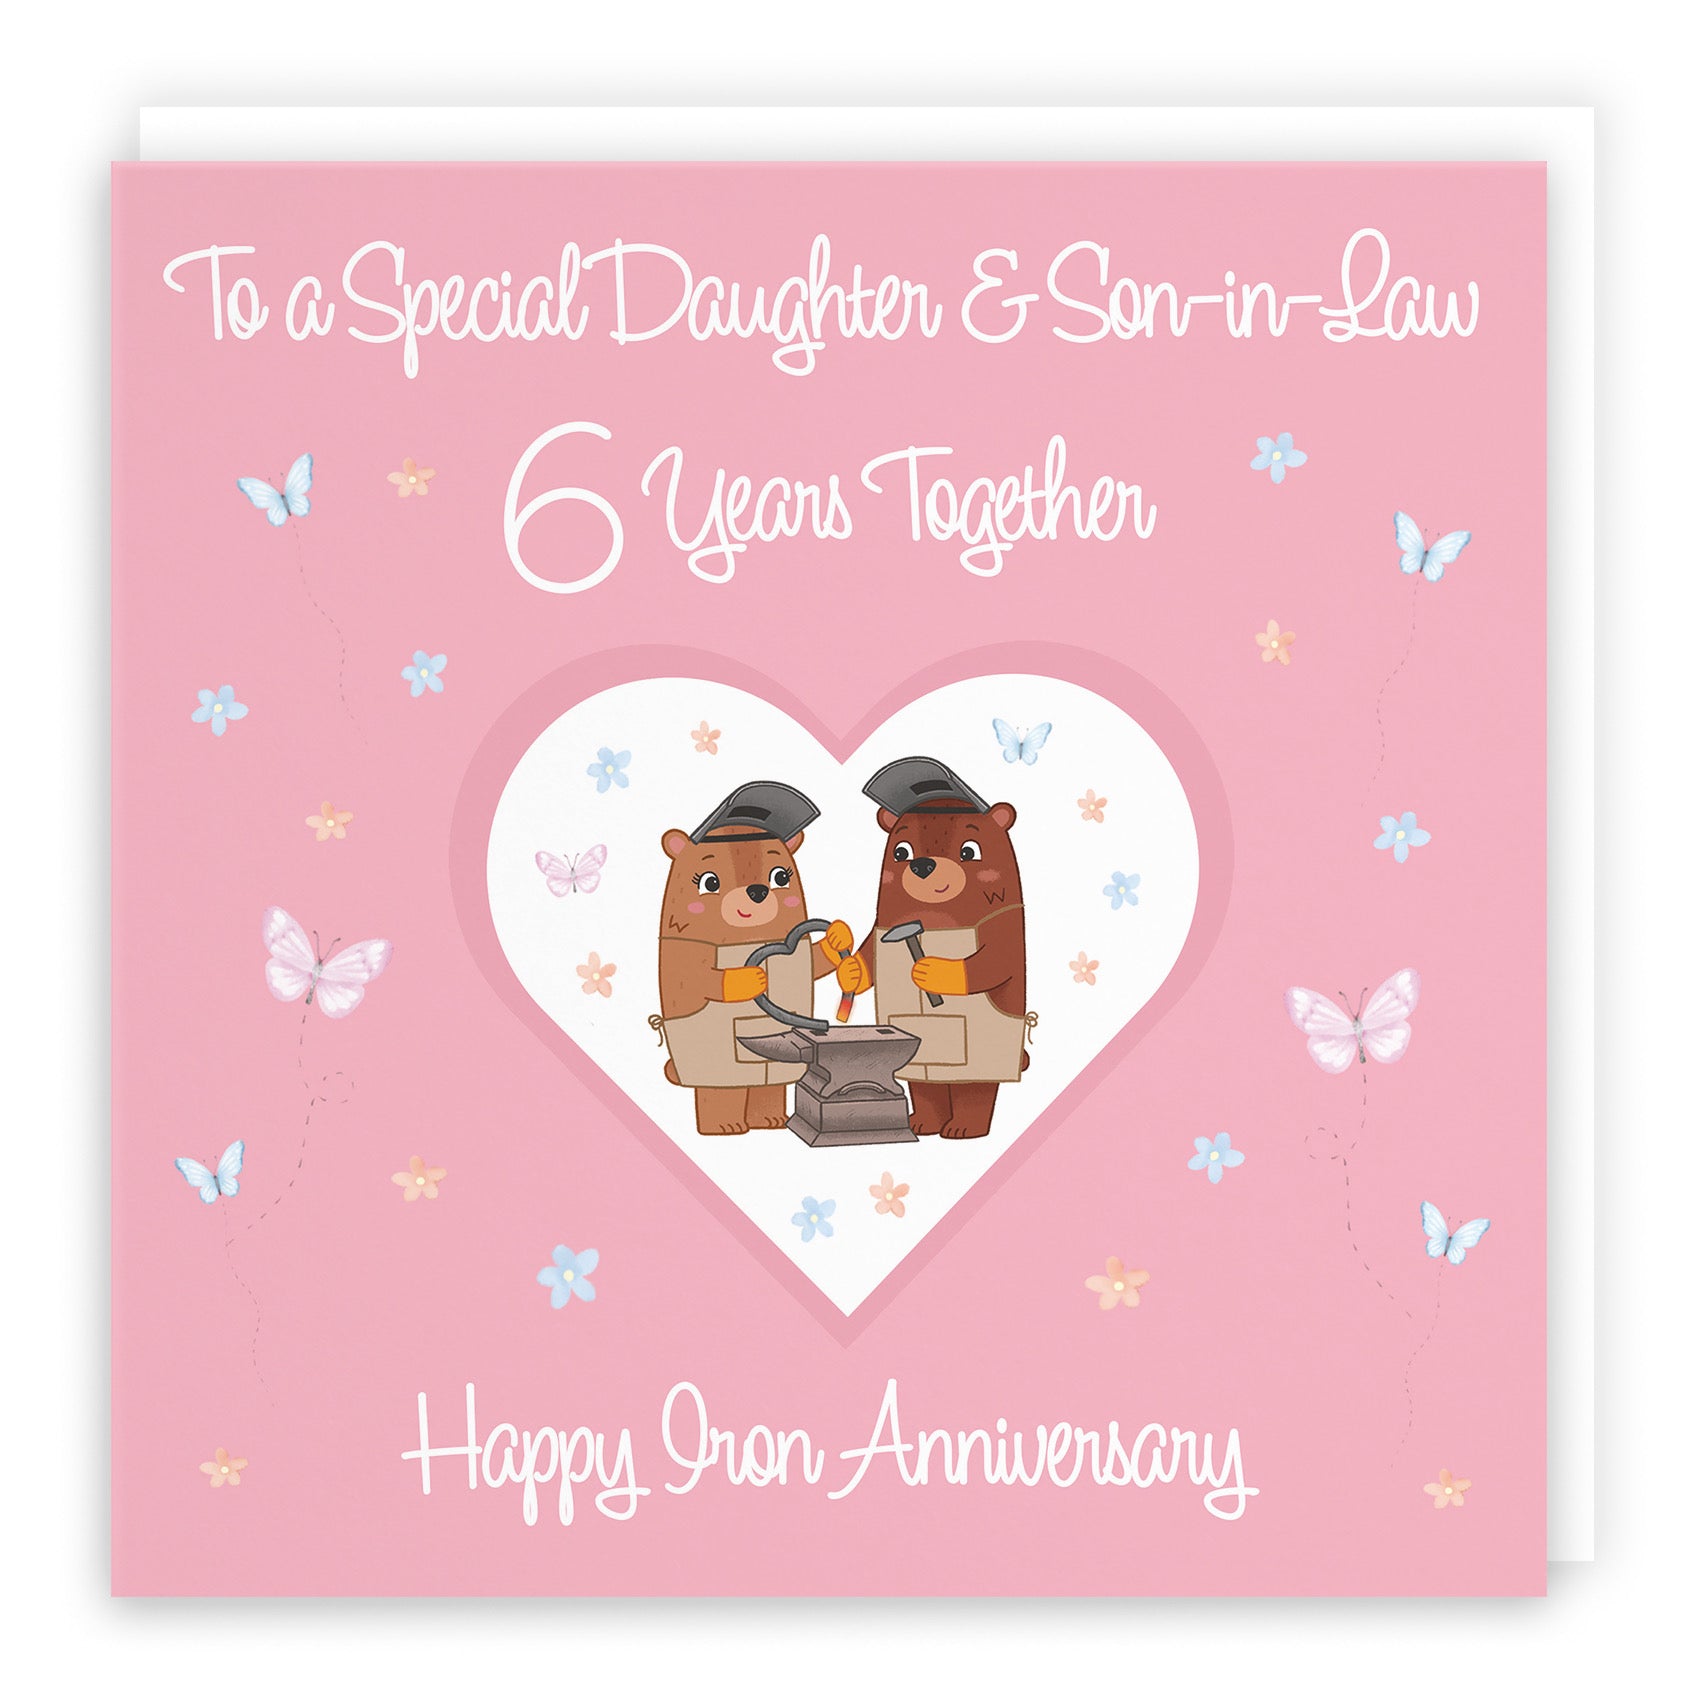 Large Daughter & Son-in-Law 6th Anniversary Card Romantic Meadows - Default Title (B0CXY3B6C6)